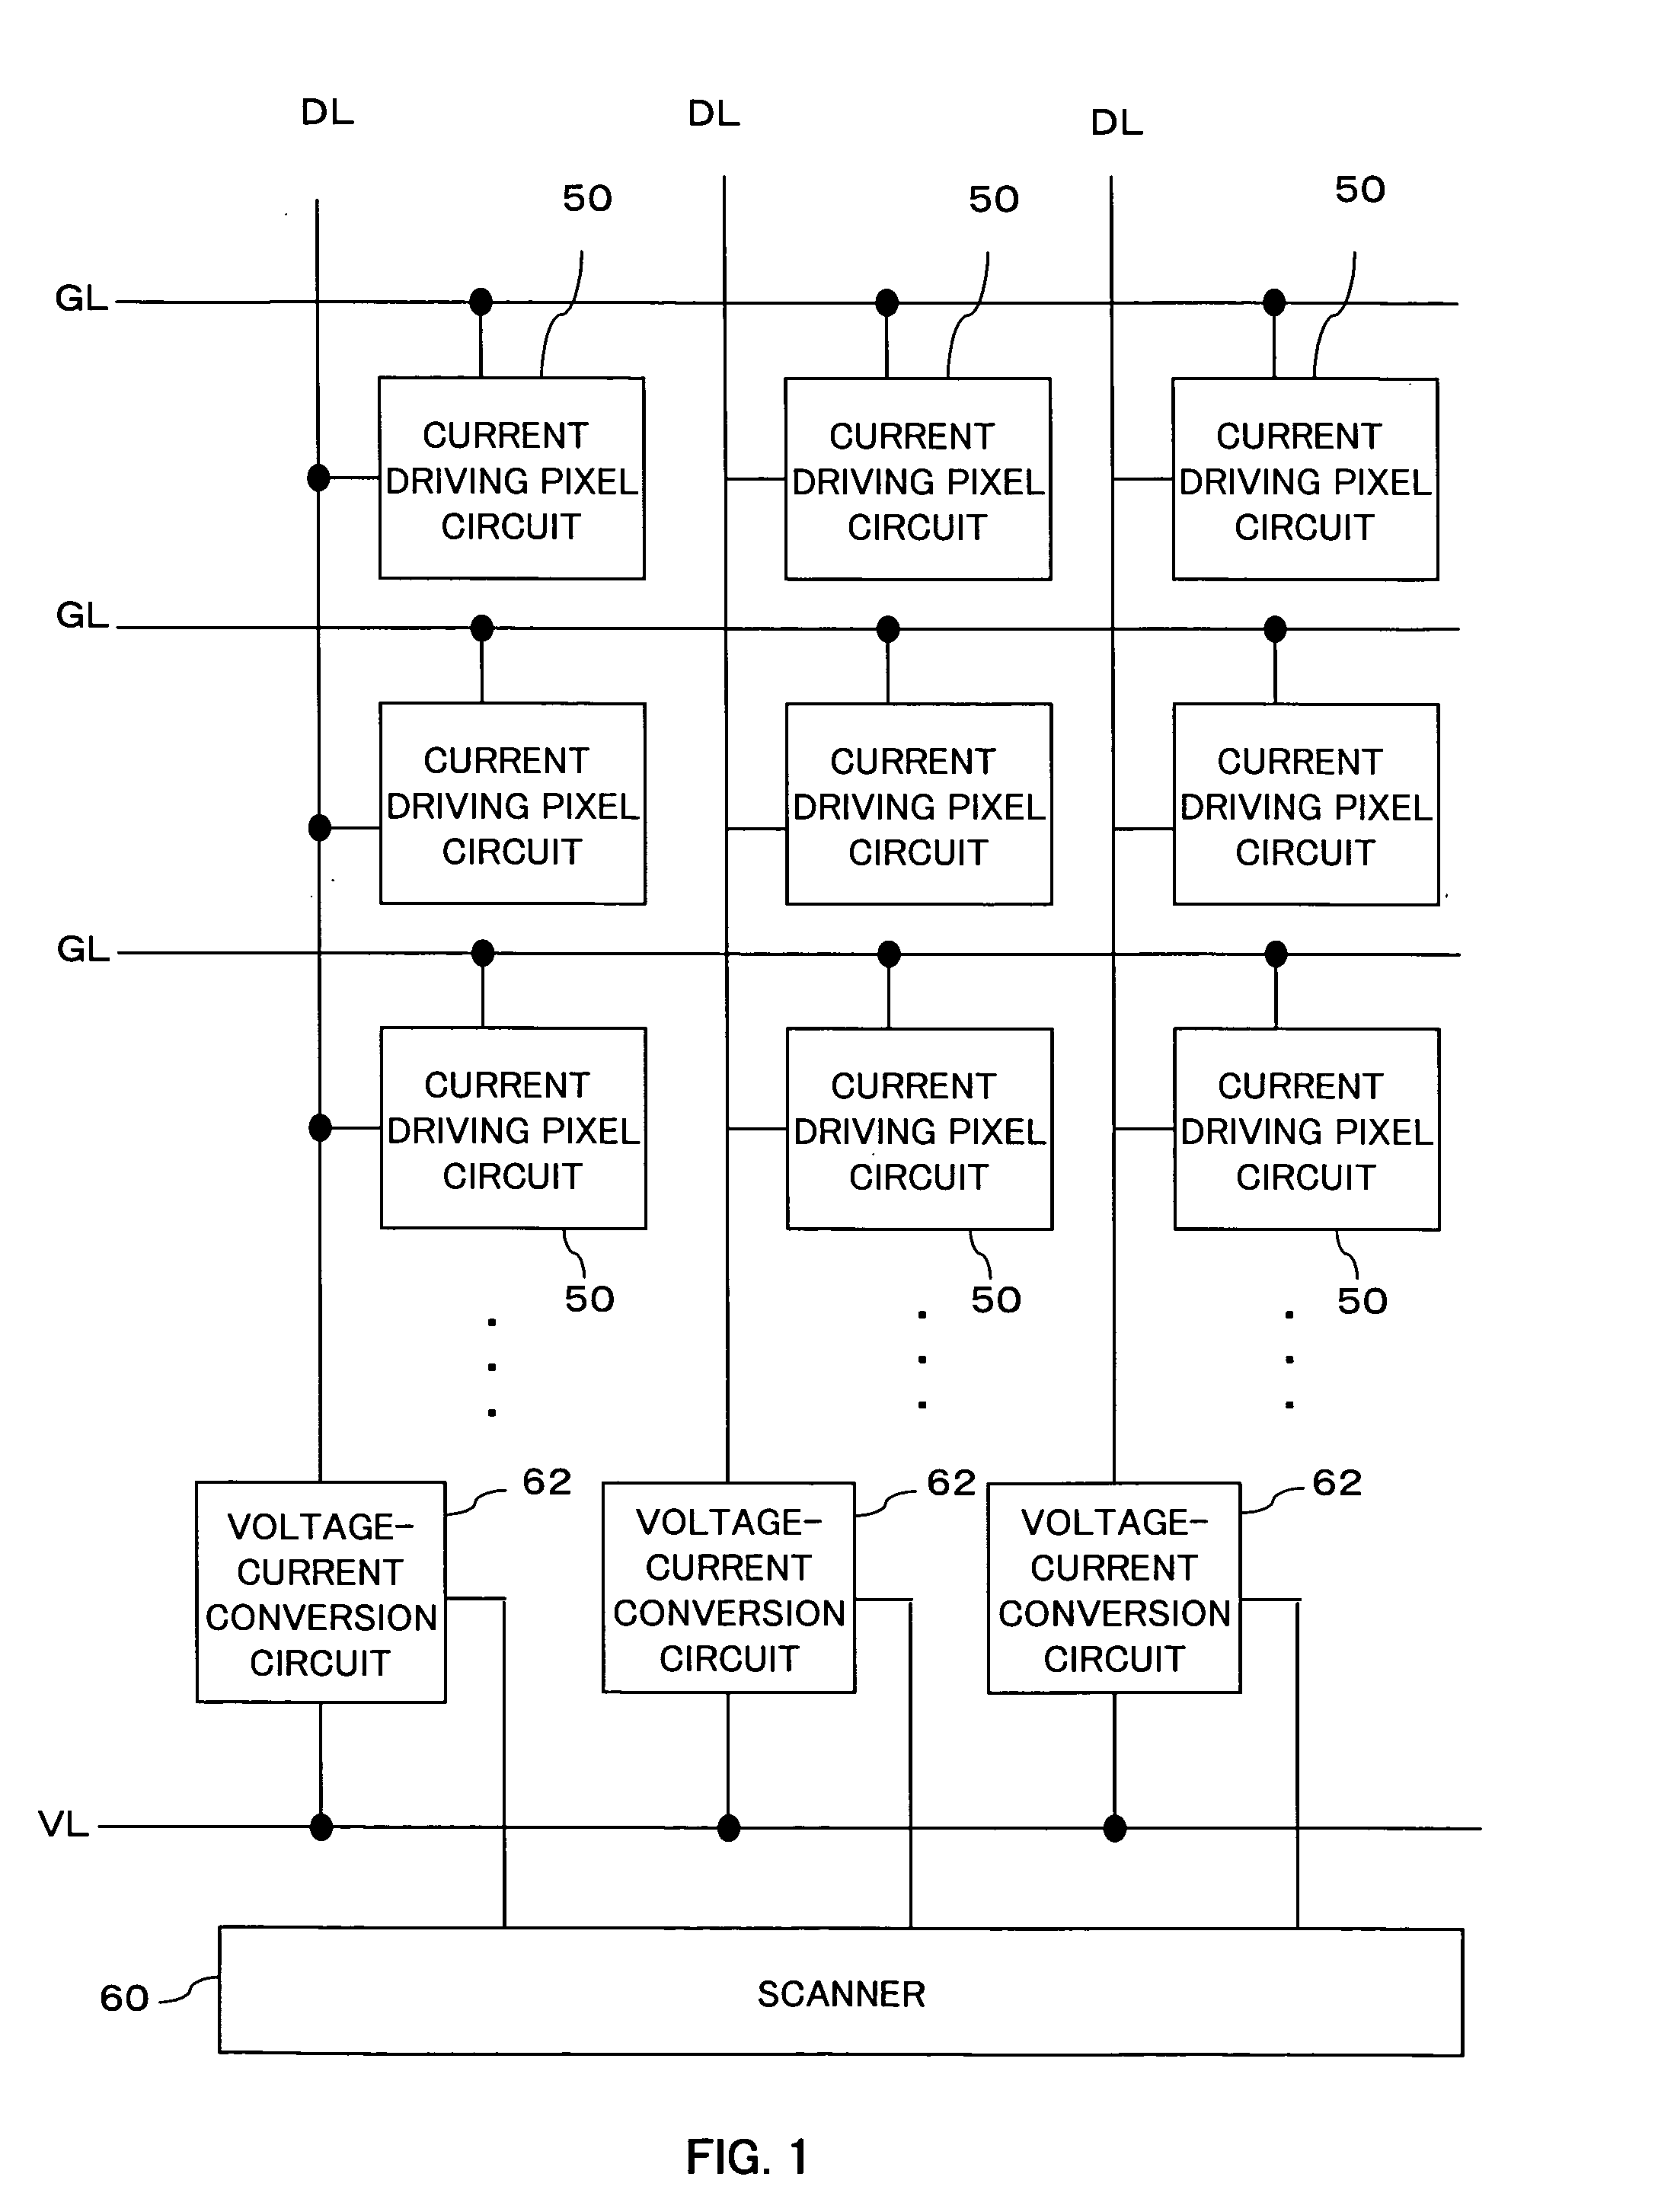 Display device using current driving pixels